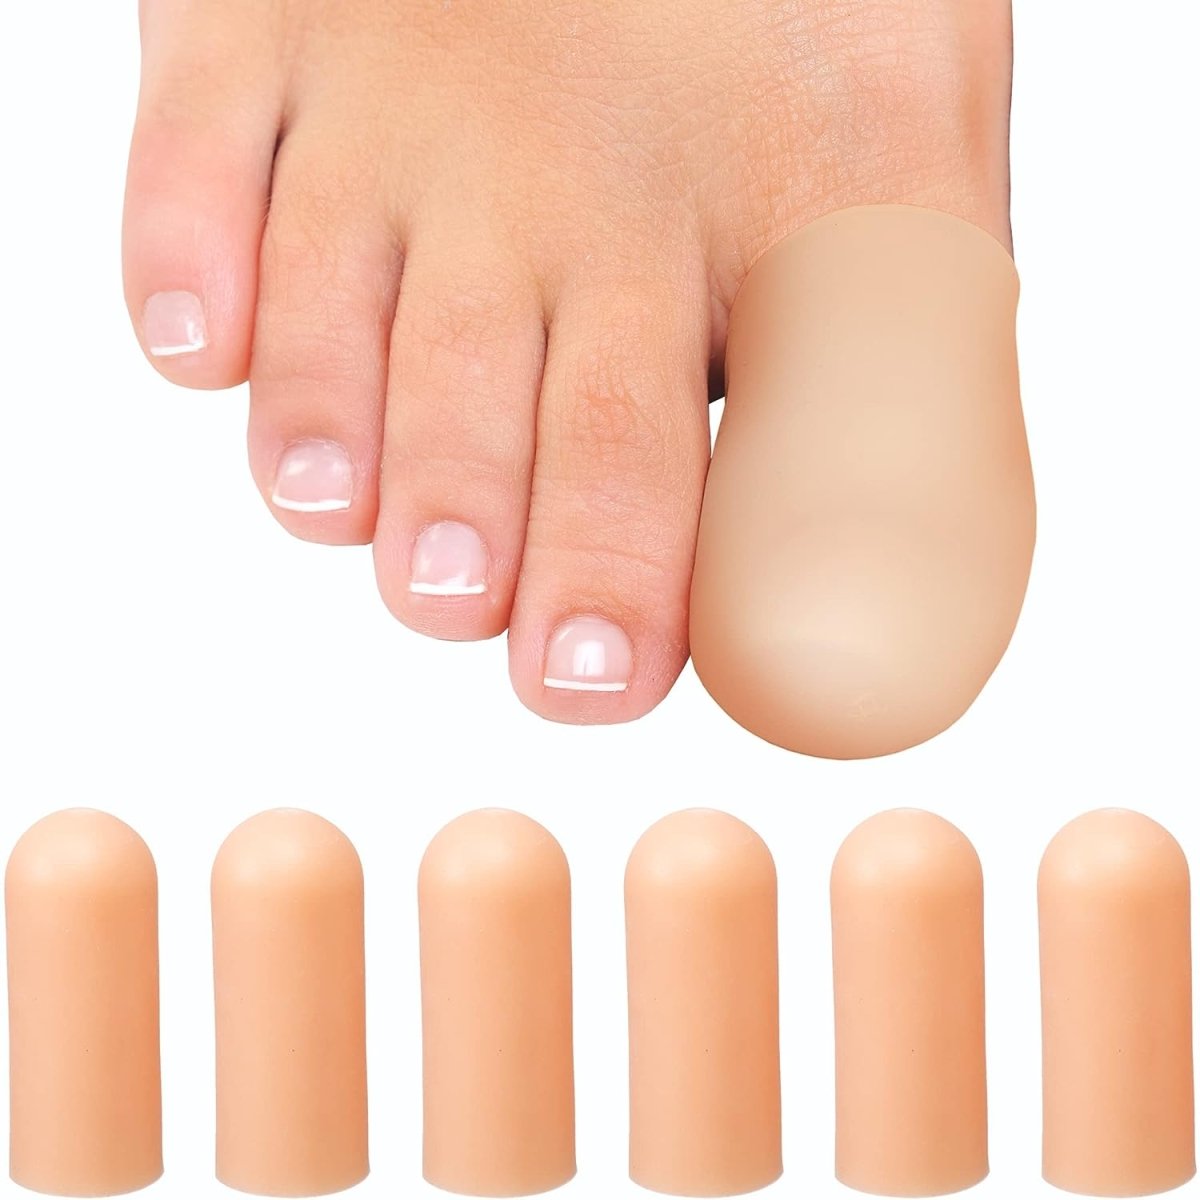 6pcs Silicone Gel Toe Cap Provide Relief from Missing/Ingrown Toenails, Corns, Calluses, Blisters, Hammer Toes (Beige) Foot Supports- Royalkart - The Urban Store